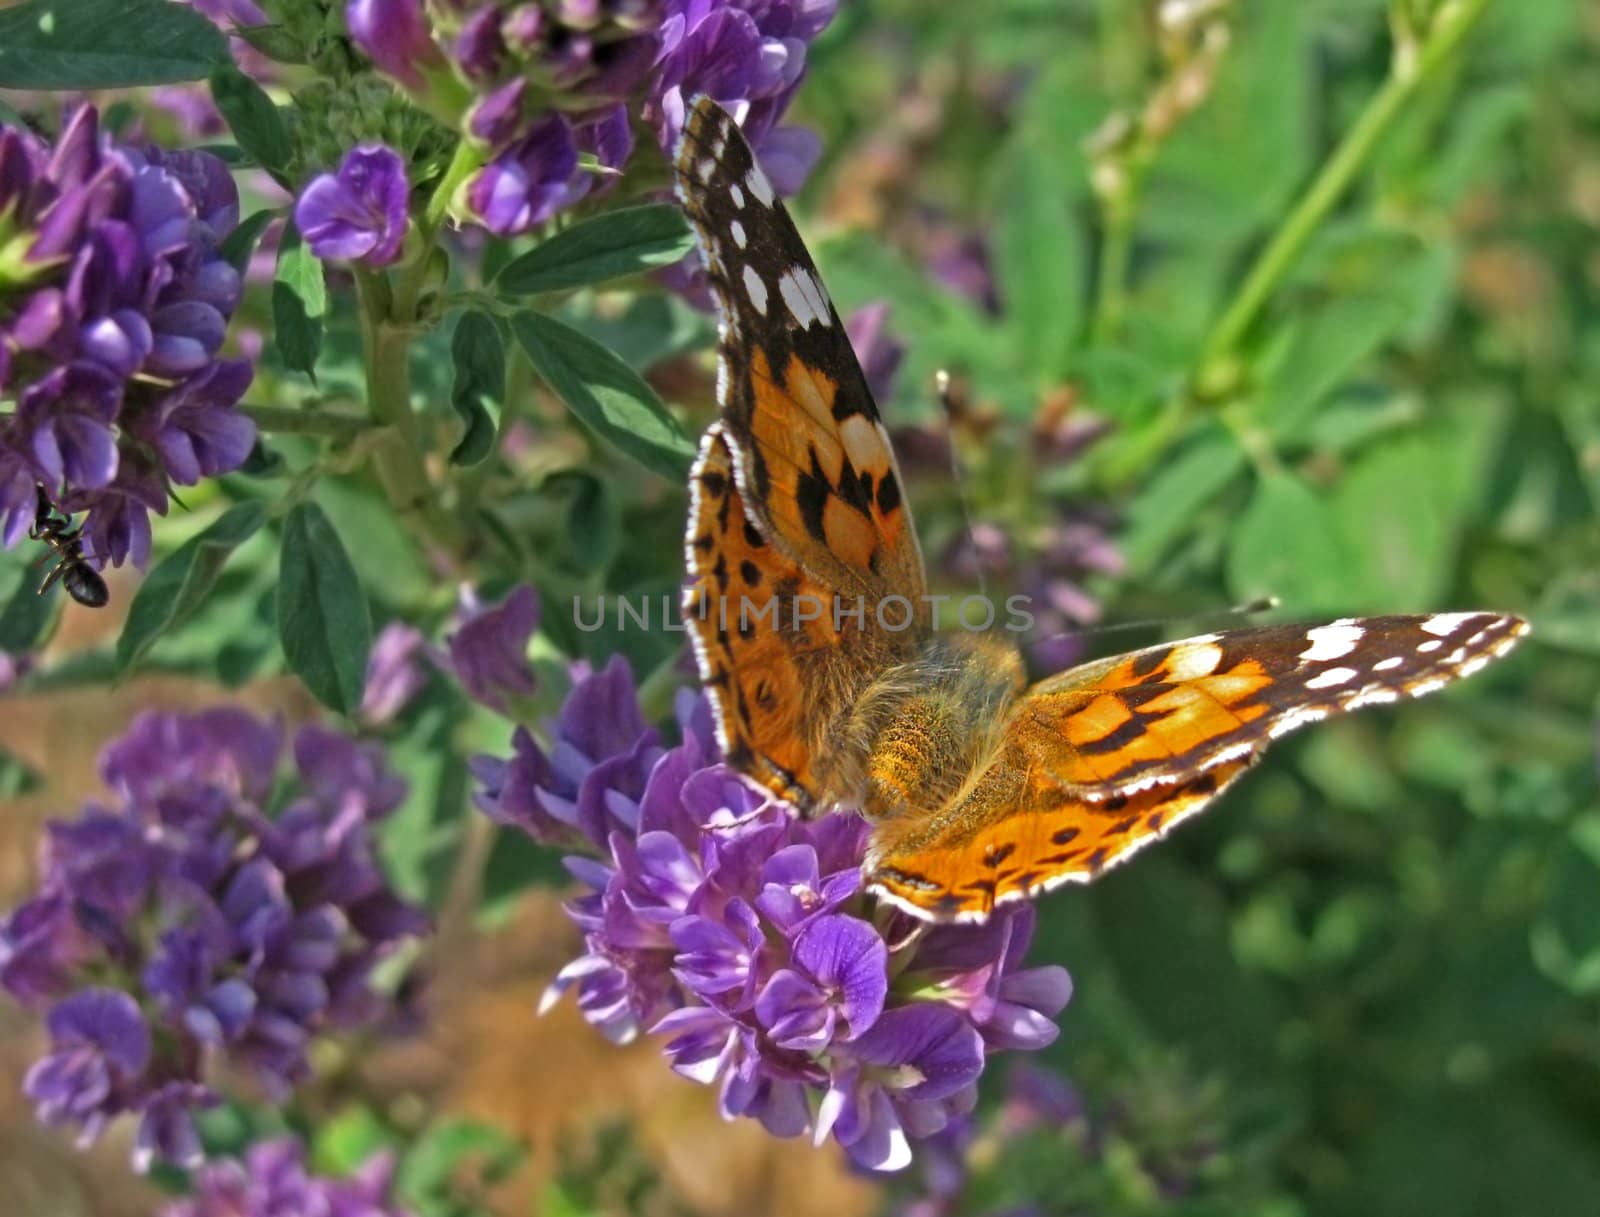 butterfly (Painted Lady) on wild flower